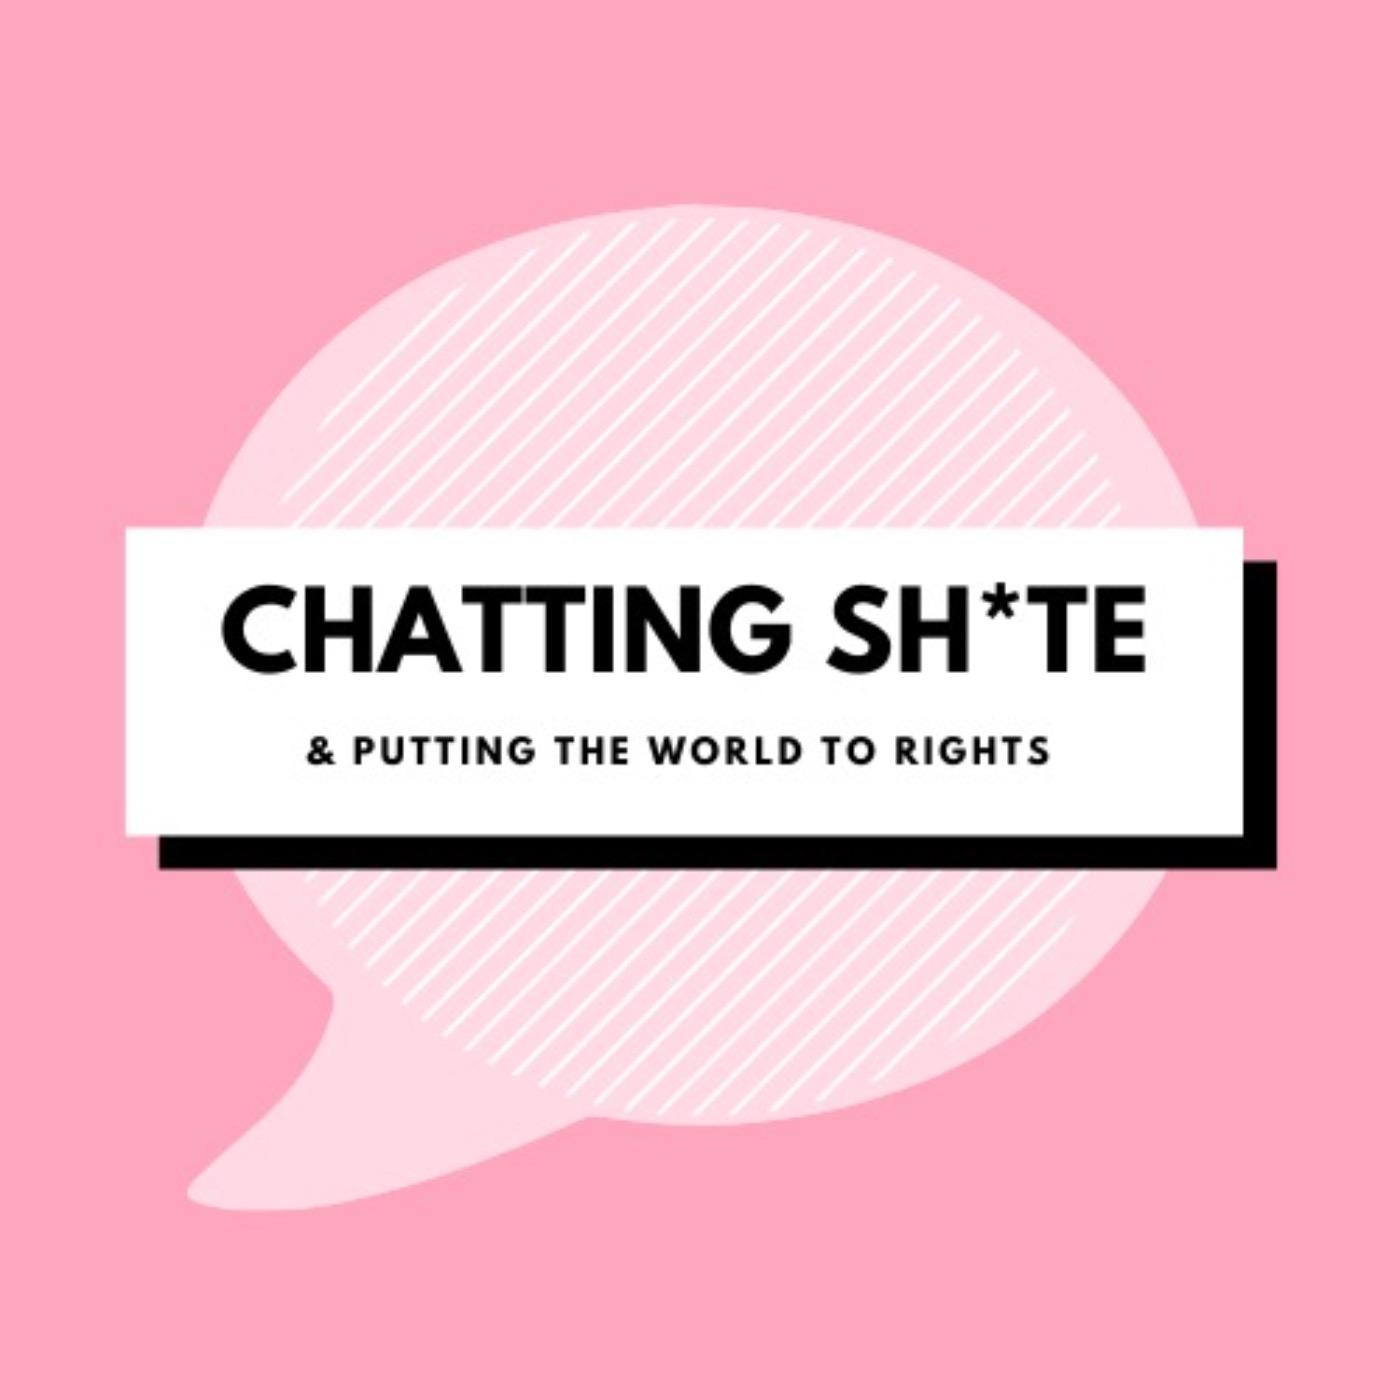 Chatting Sh*te and Putting The World To Rights